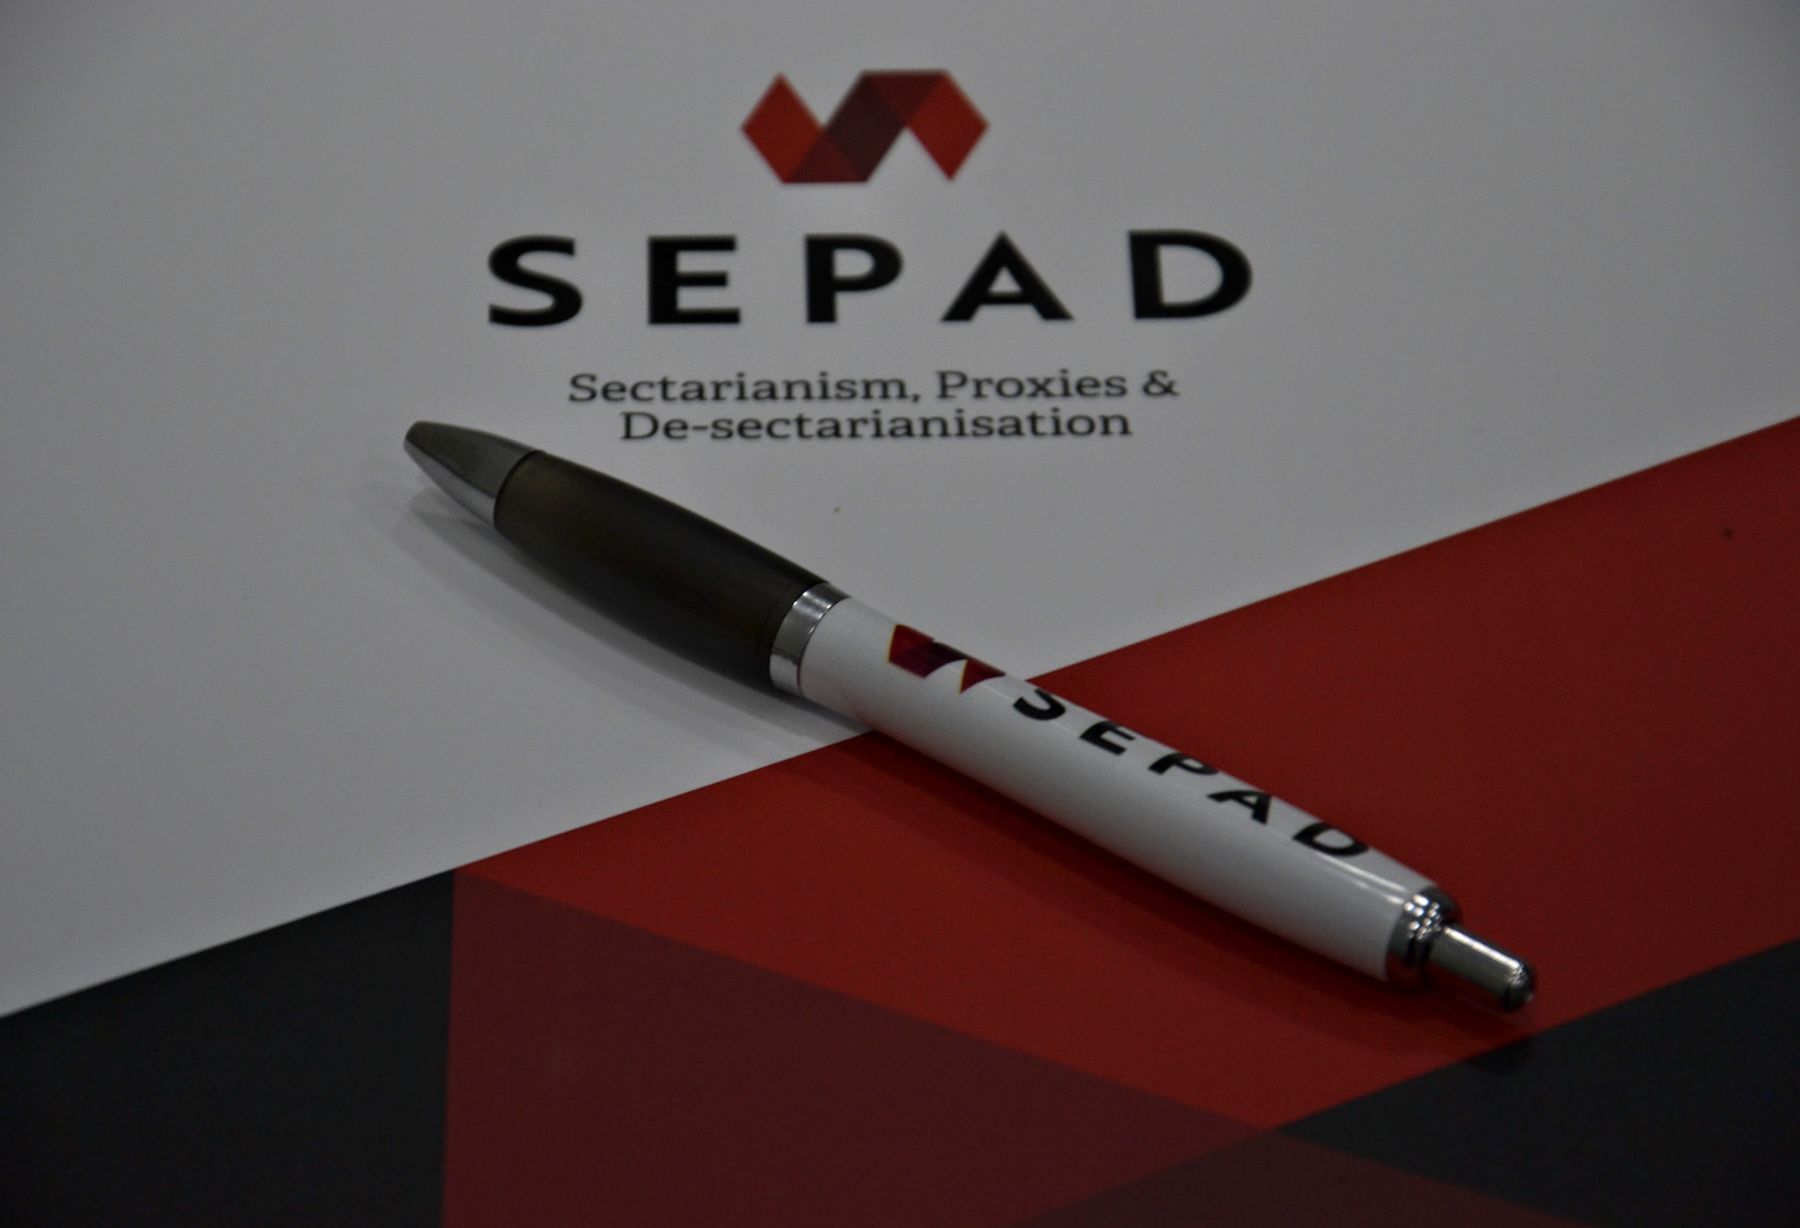 SEPAD conference 2020: From Sectarianism to De-Sectarianization